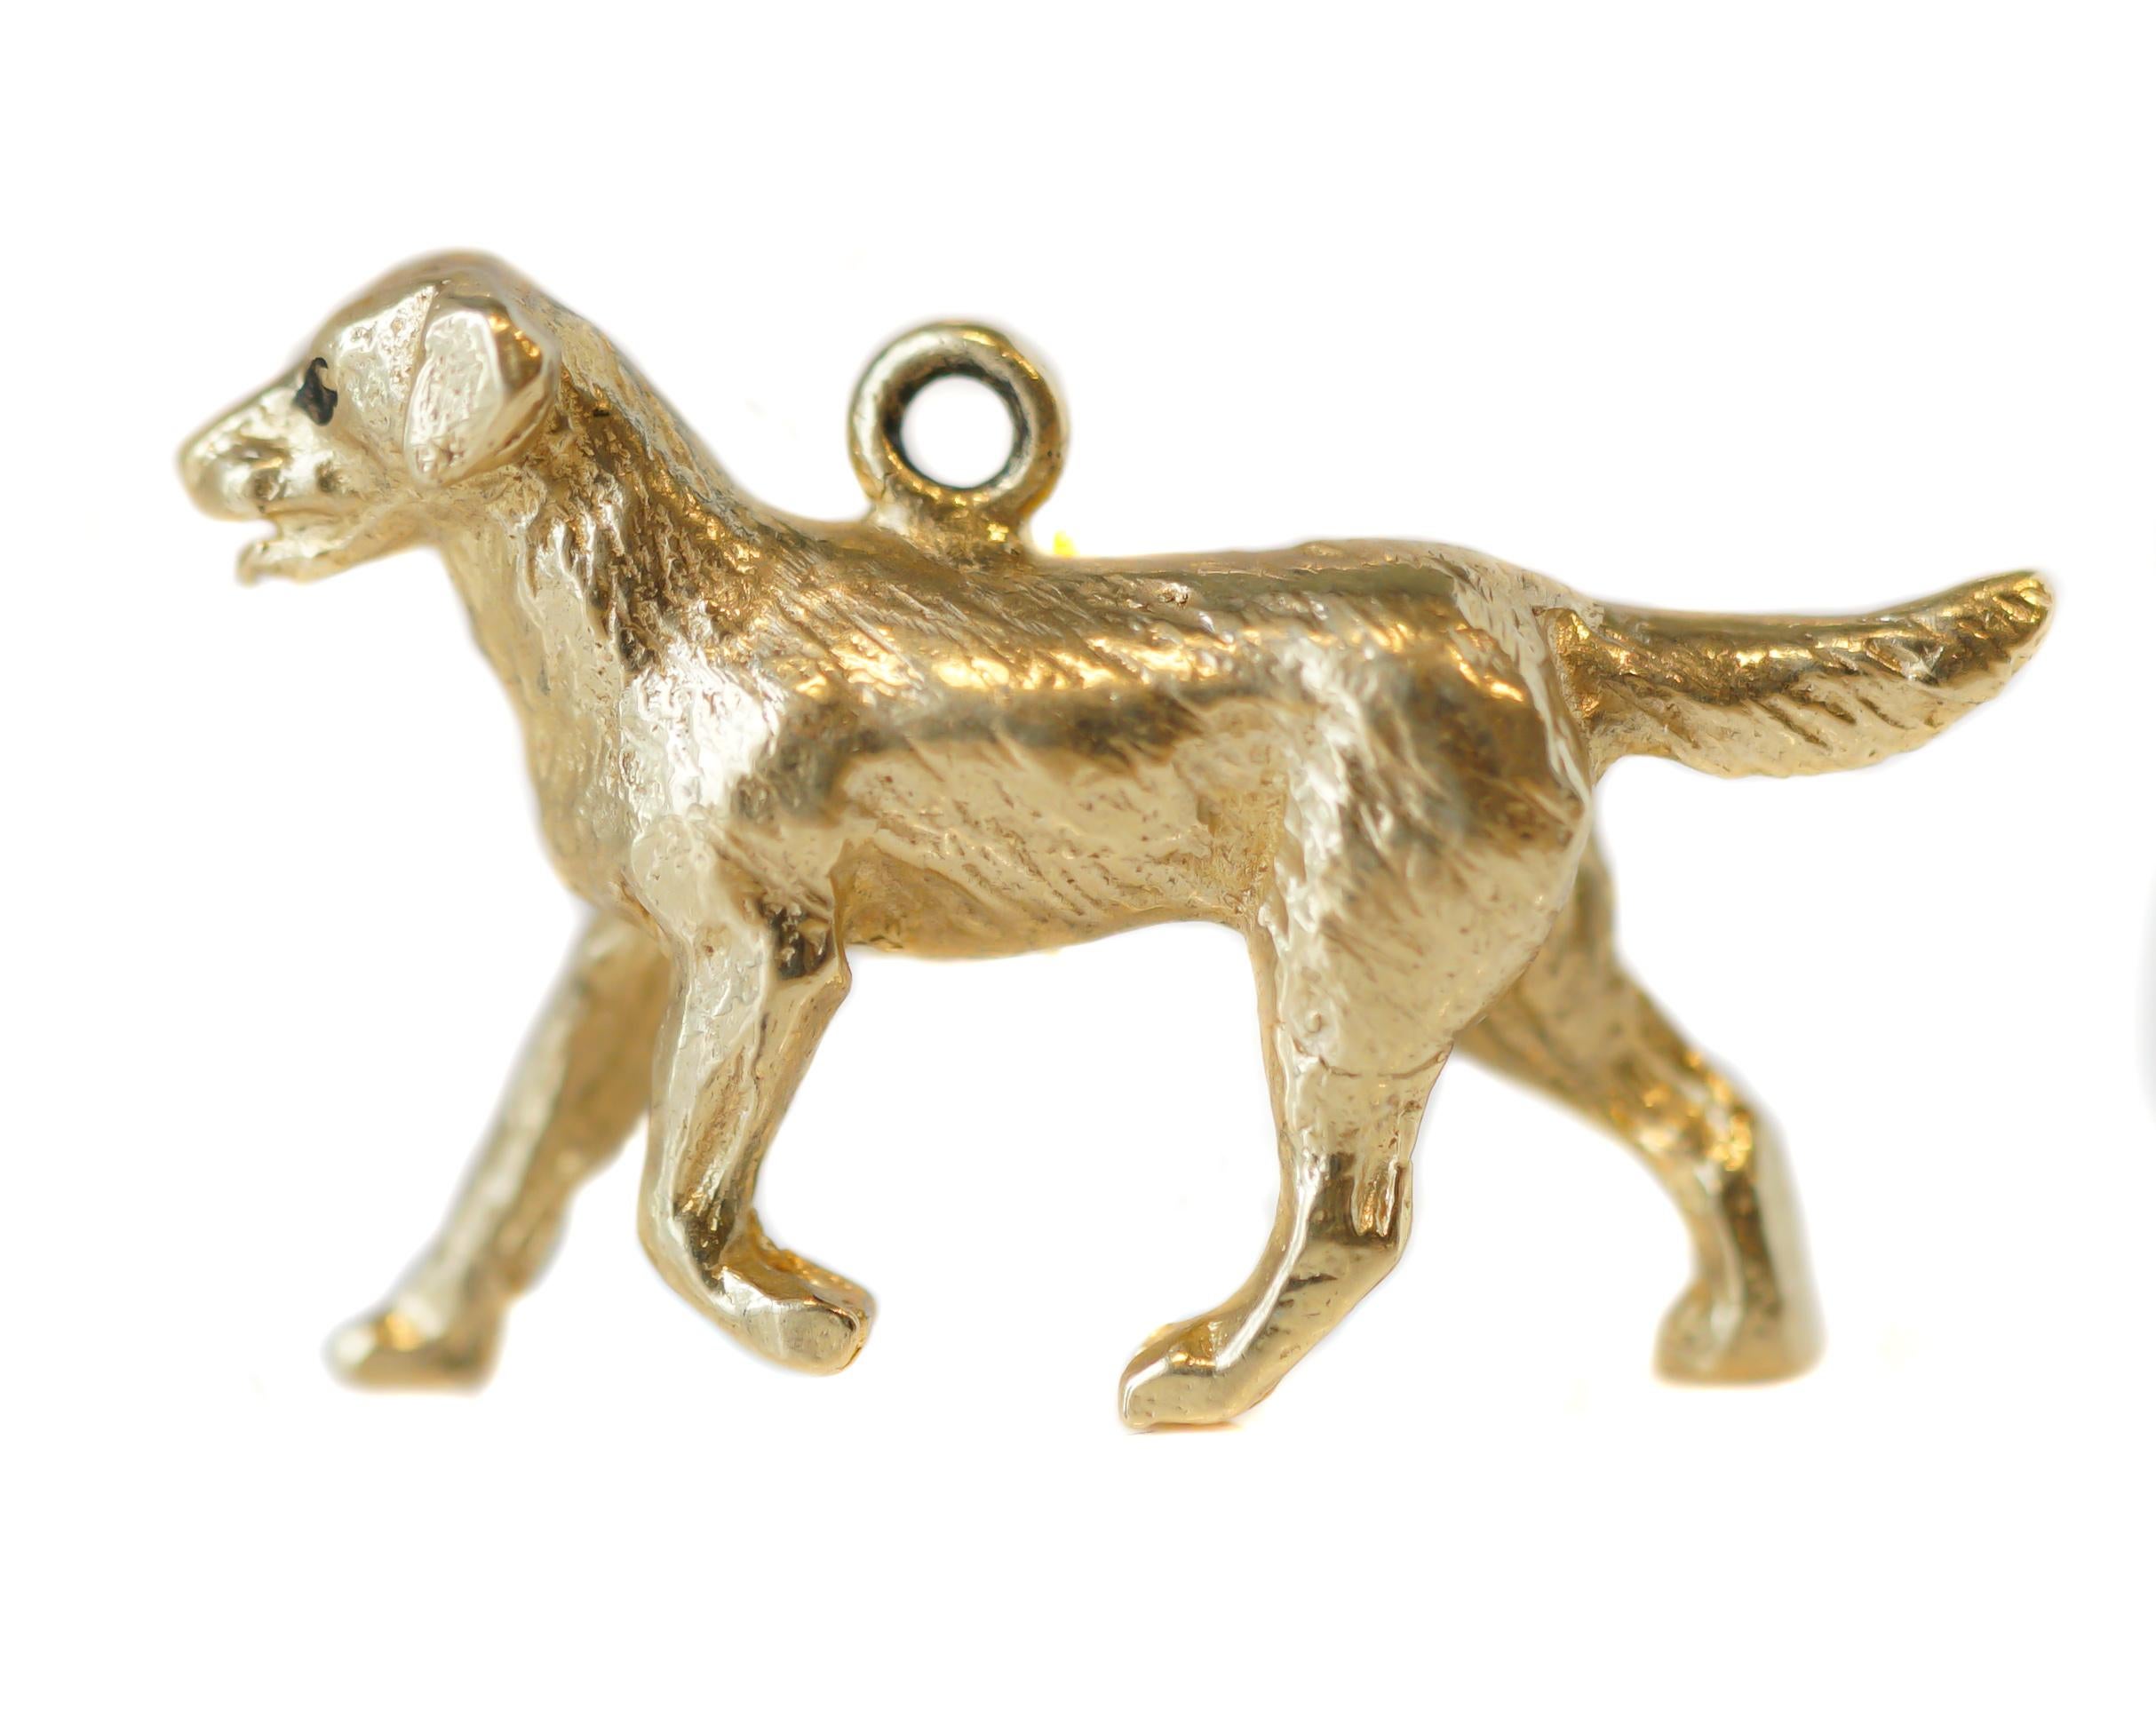 1950s Retro Dog Charm - 14 Karat Yellow Gold

Features:
Trotting Dog - Labrador Retriever, Golden Retriever, Hunting Dog
Very Detailed Design with outstretched fanning tail
Textured 14 karat Yellow Gold
Sturdy Bail 
Measures 25 x 15 millimeters